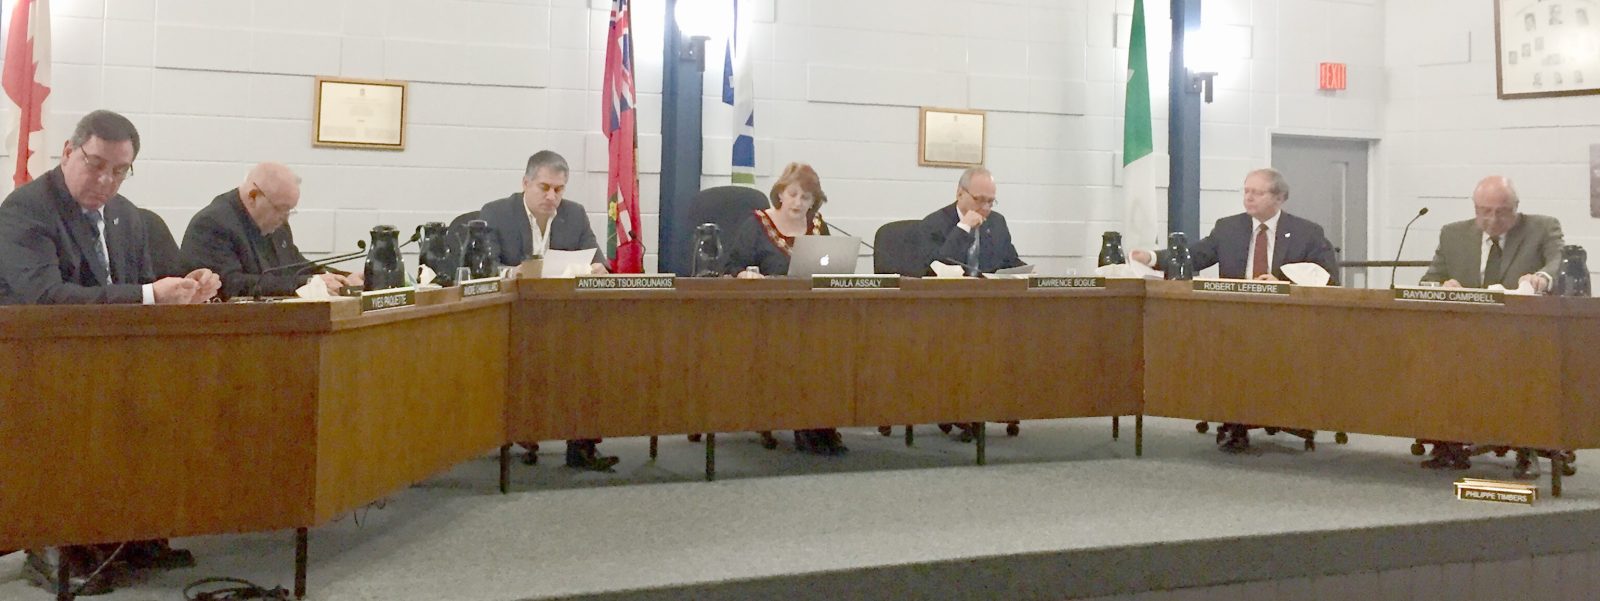 Town may cancel in-person tax payments